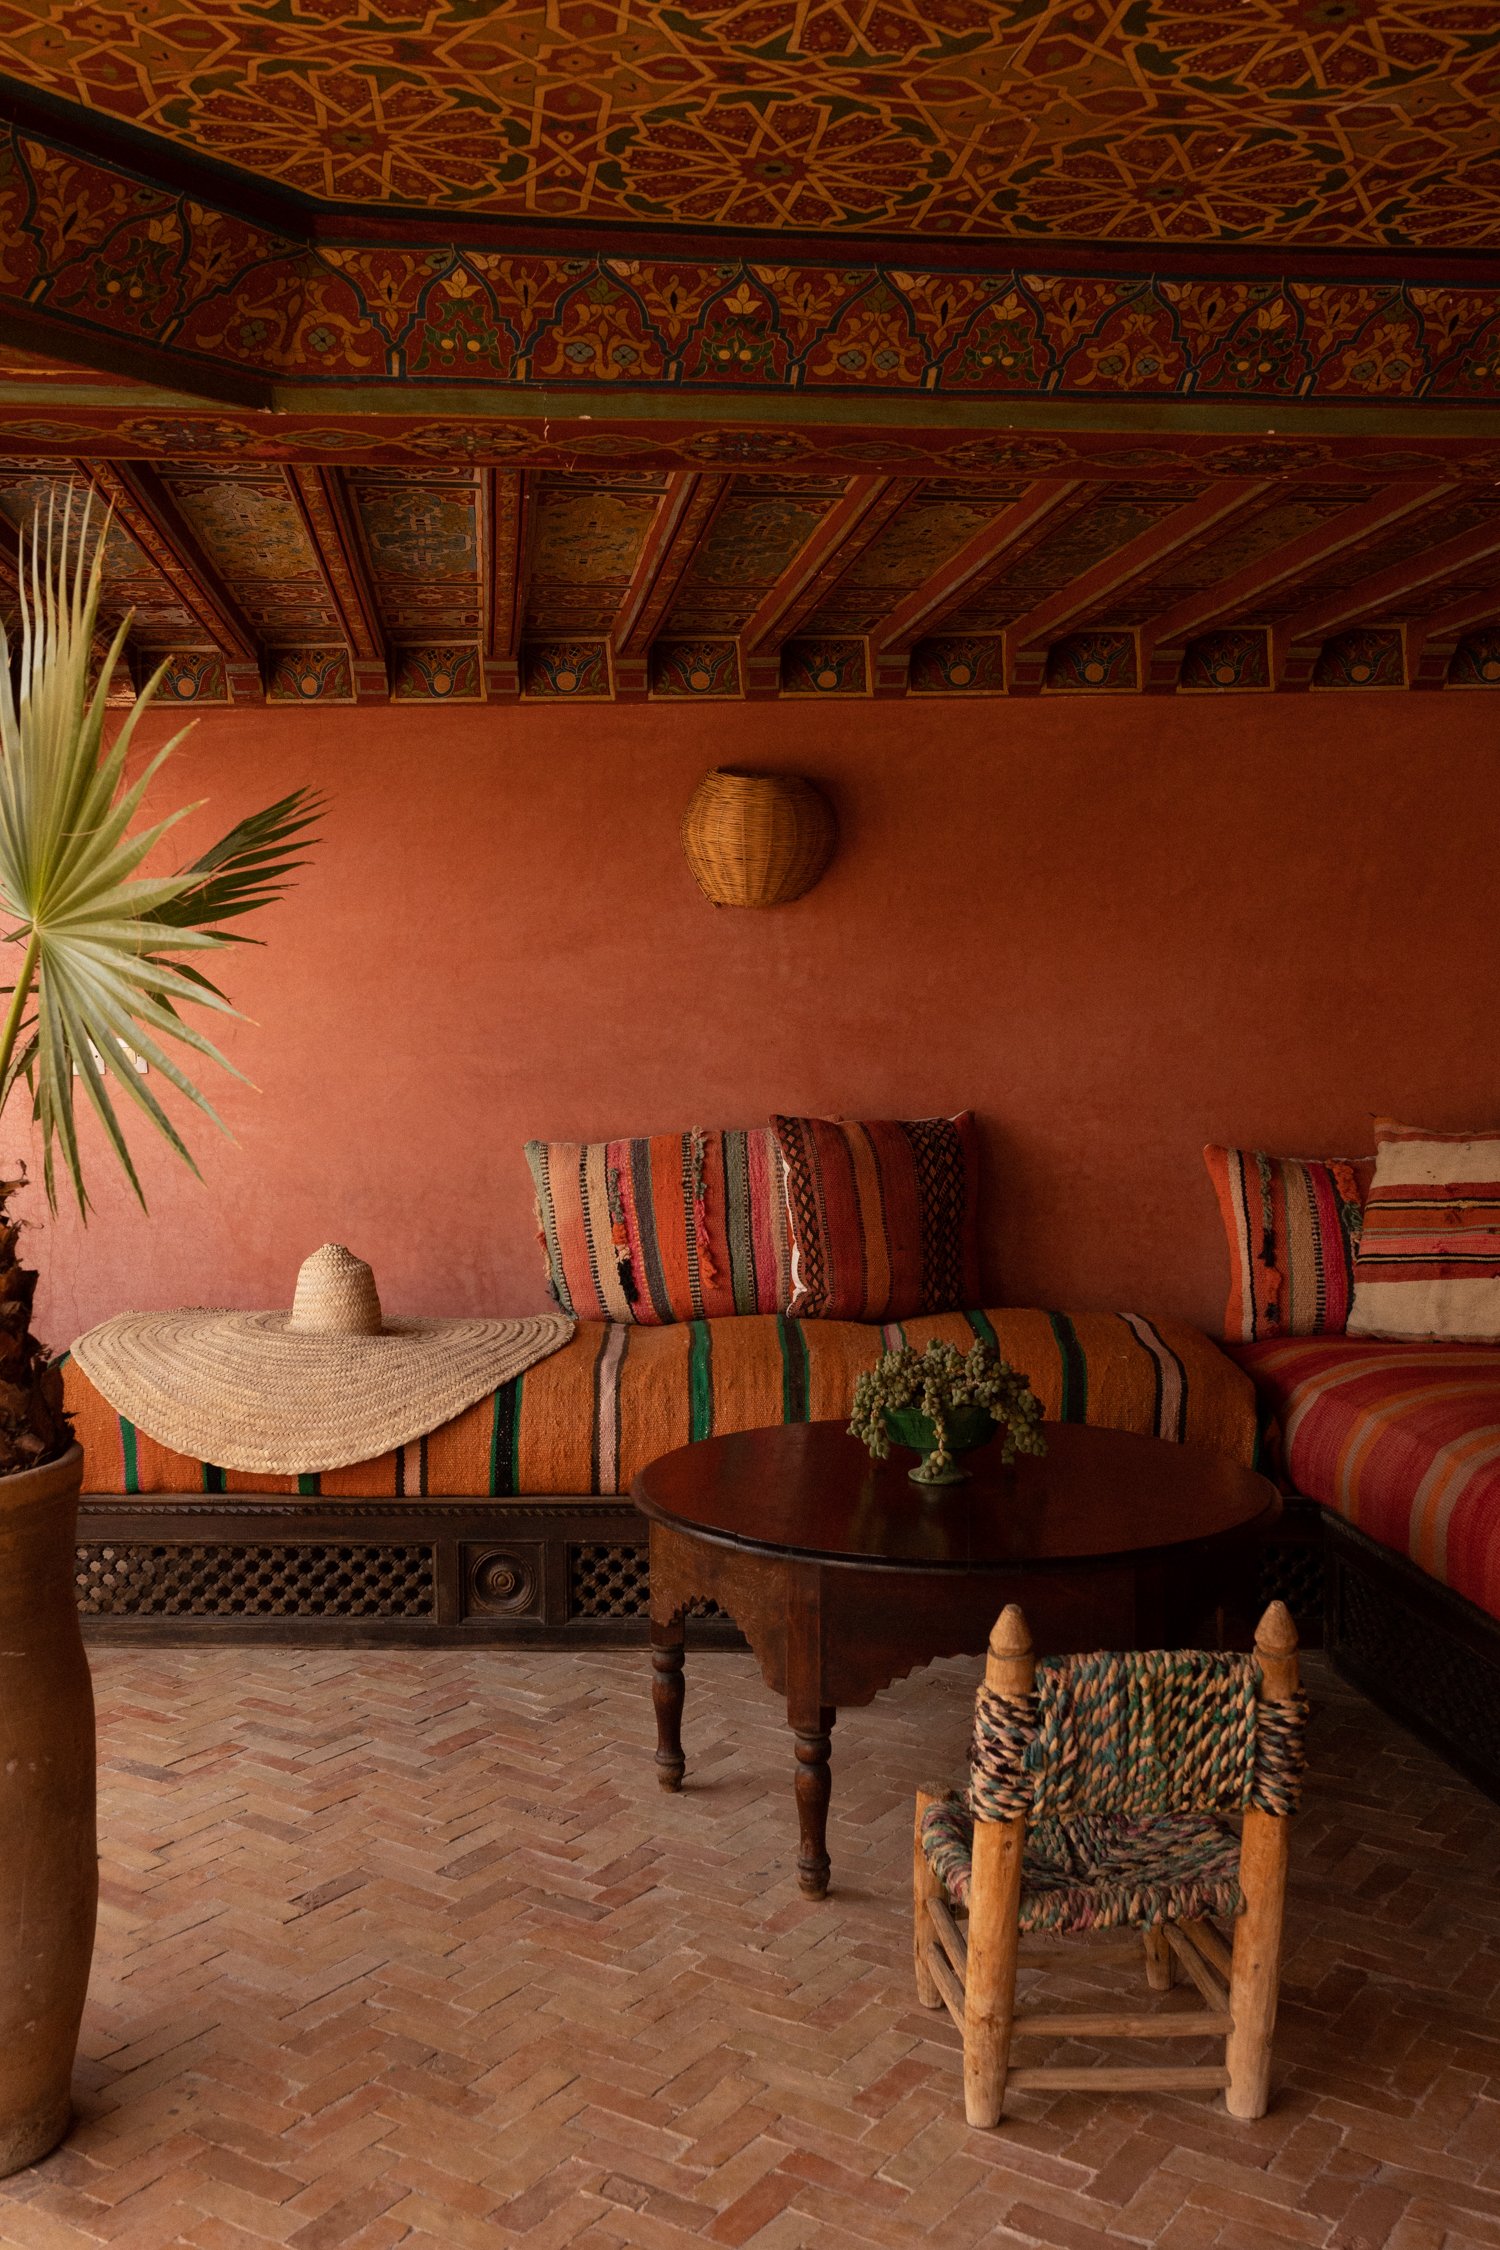 Marrakech Travel Guide_ Curated Picks for Where to Stay, Eat, and Explore, Plus Insider Tips-2-2.jpg